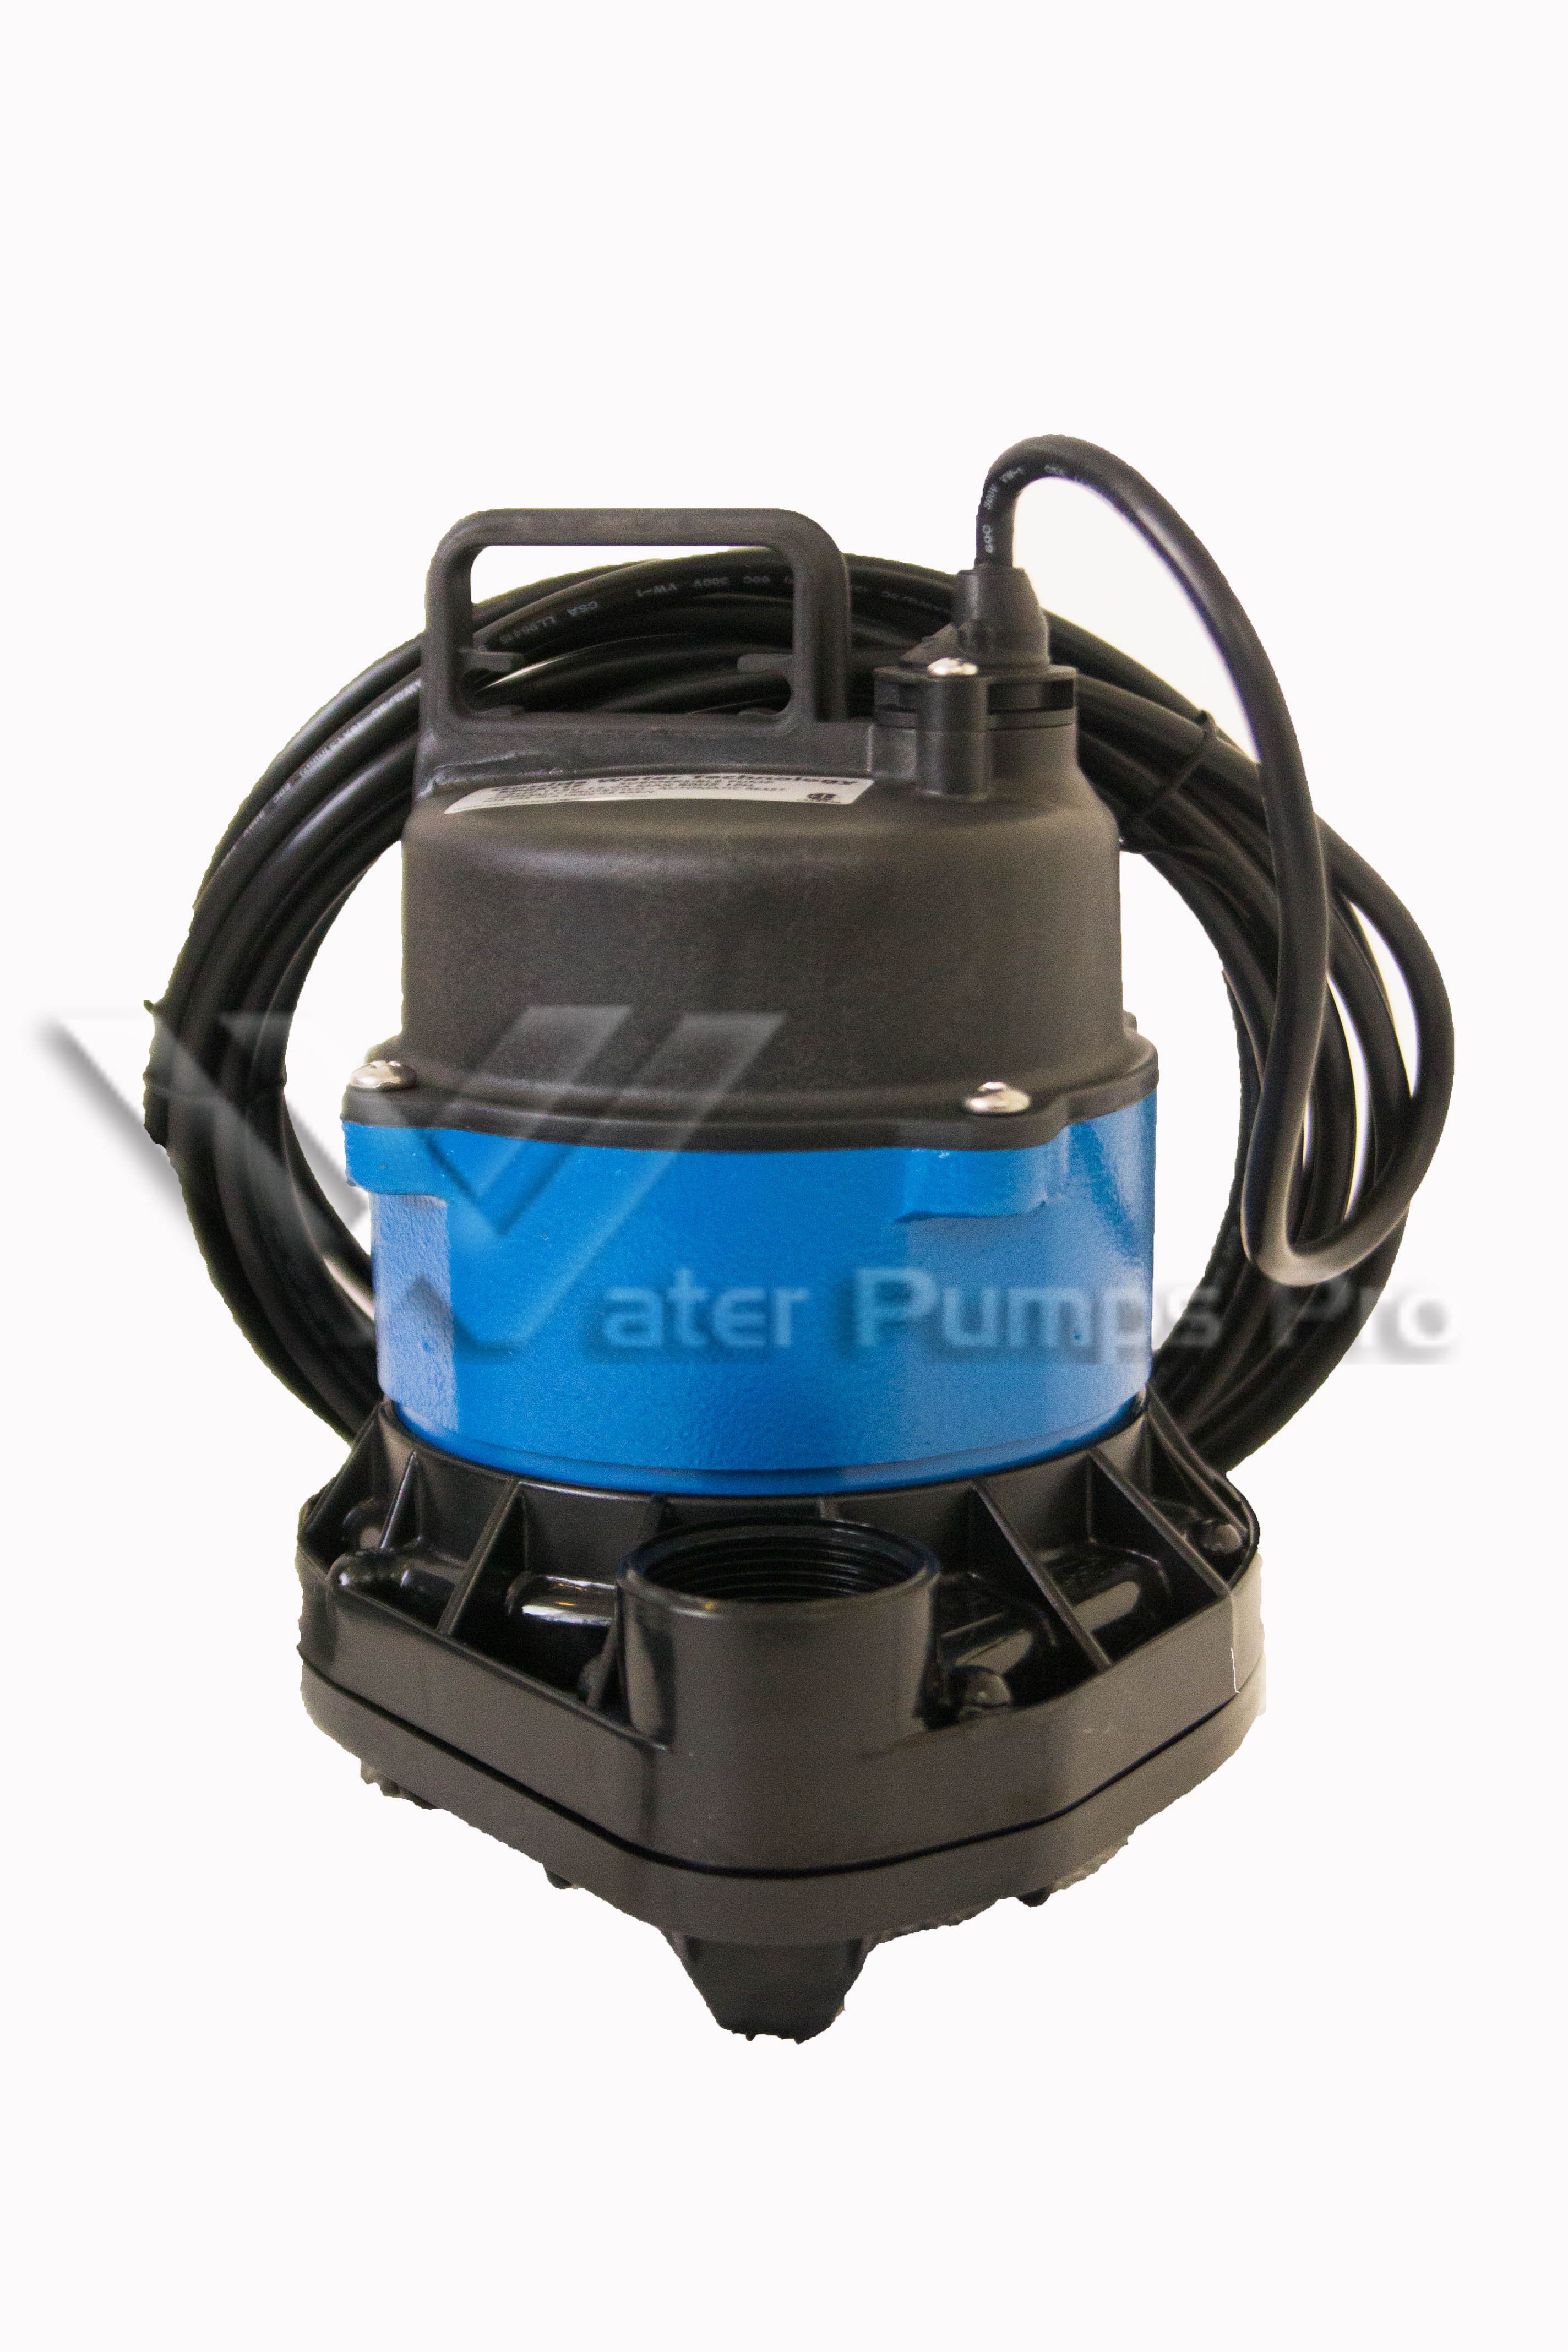 Goulds EP0511F 1/2 HP 115V Submersible Effluent Pump - Click Image to Close